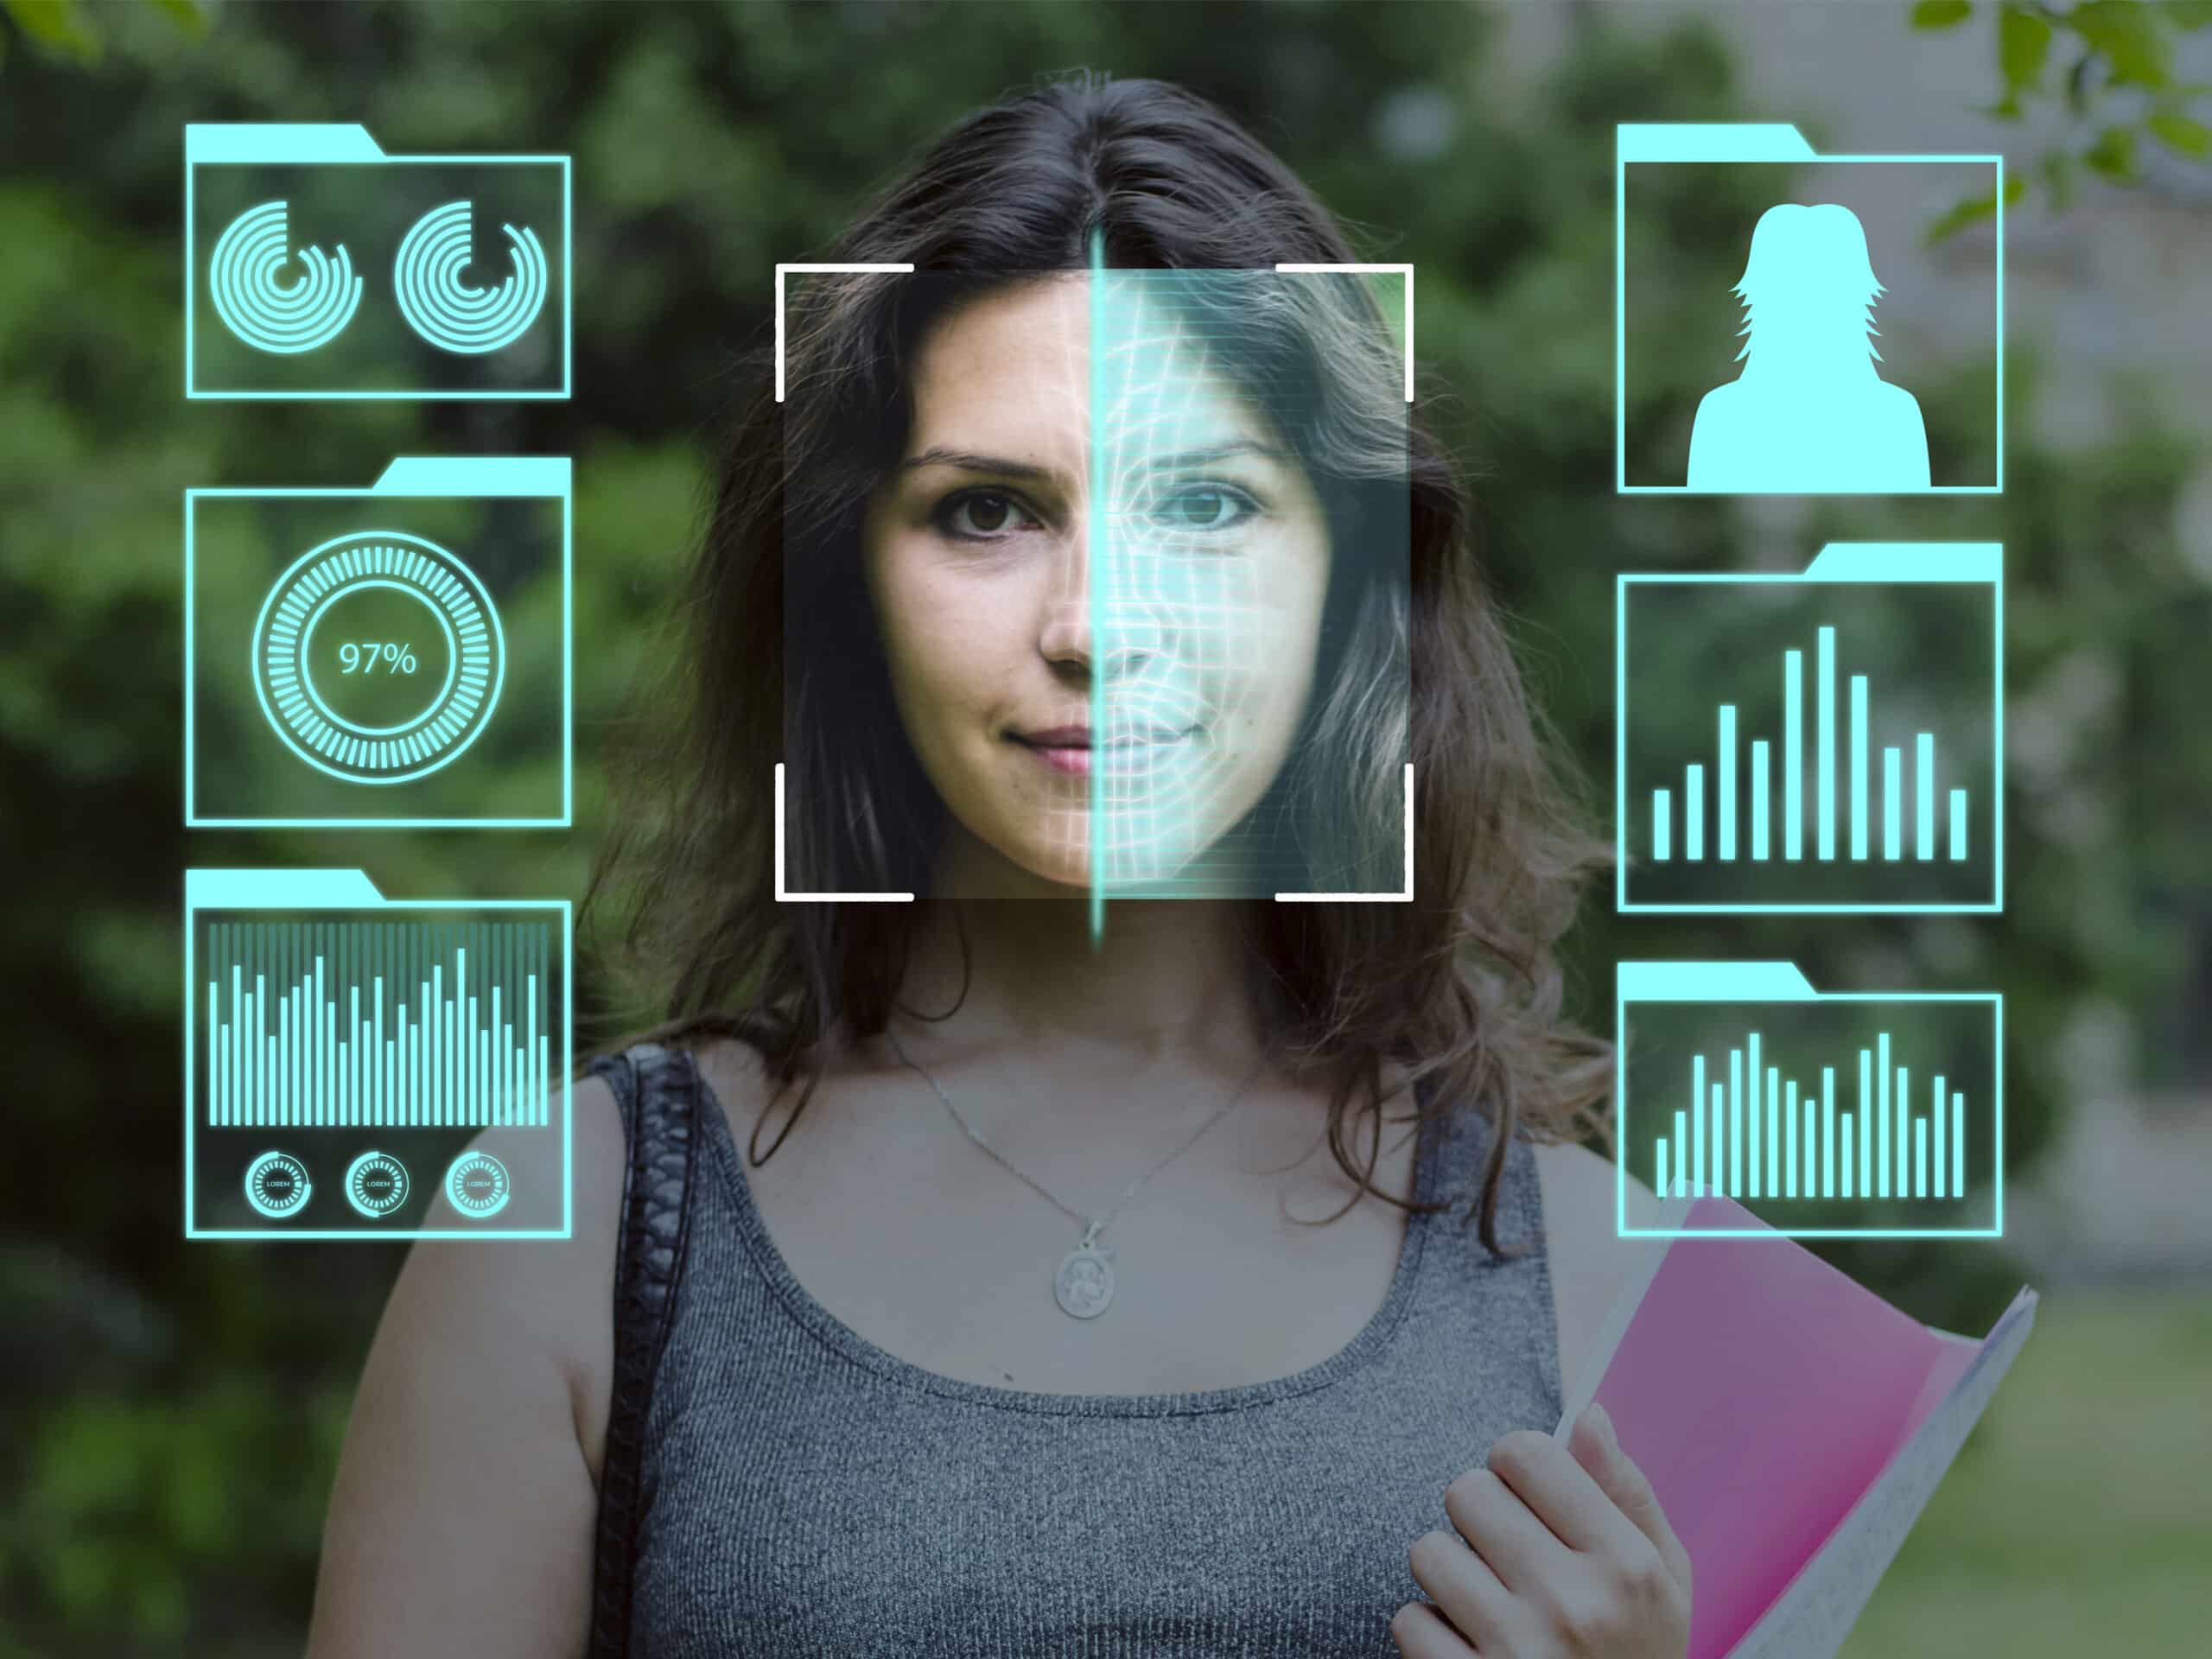 Secure Identification: Facial Recognition for Stronger Authentication